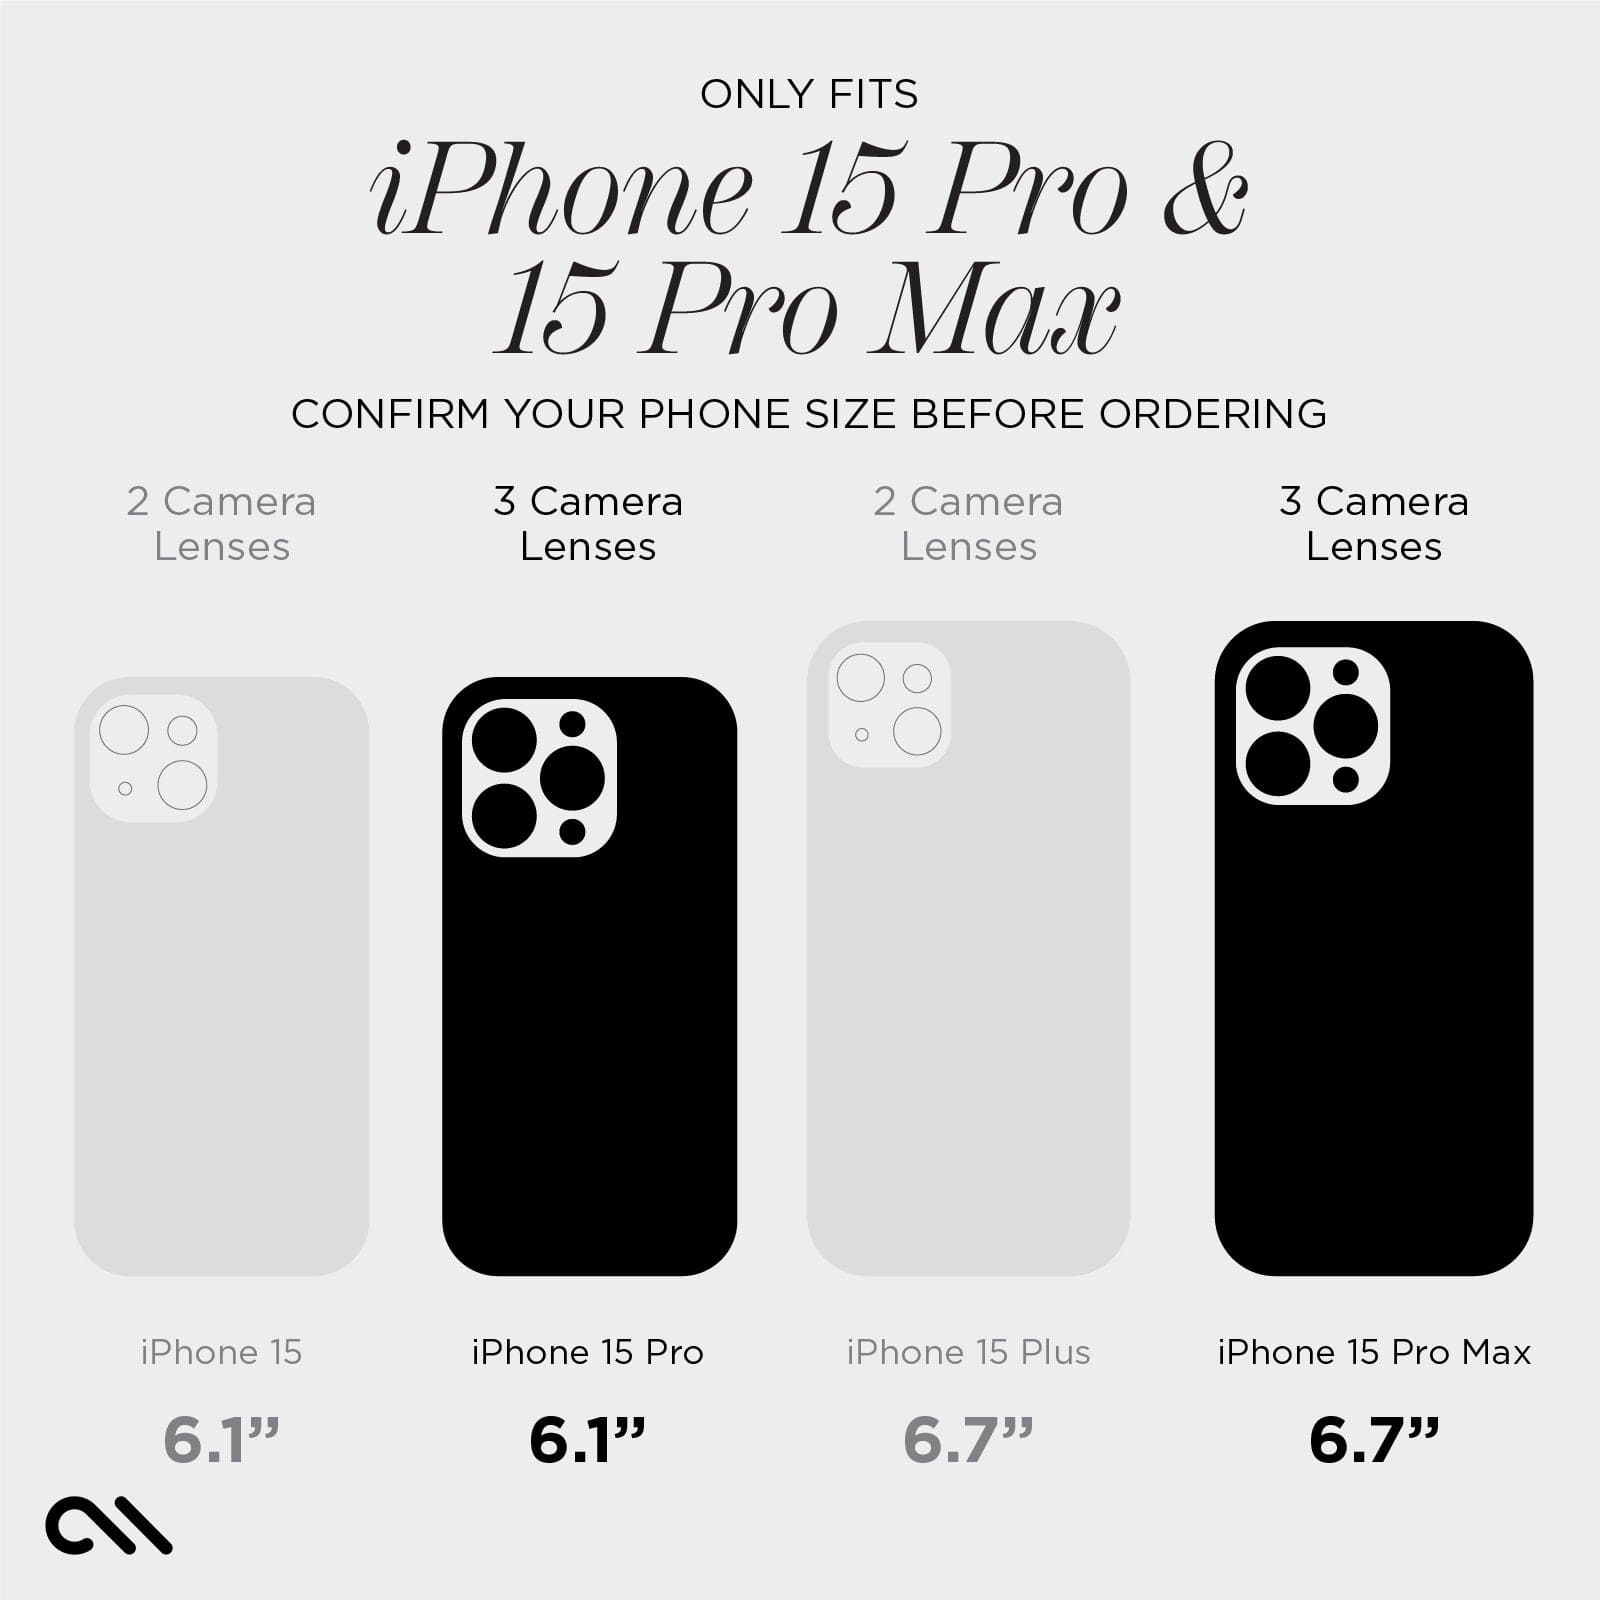 ONLY FITS IPHONE 15 PRO AND 15 PRO MAX